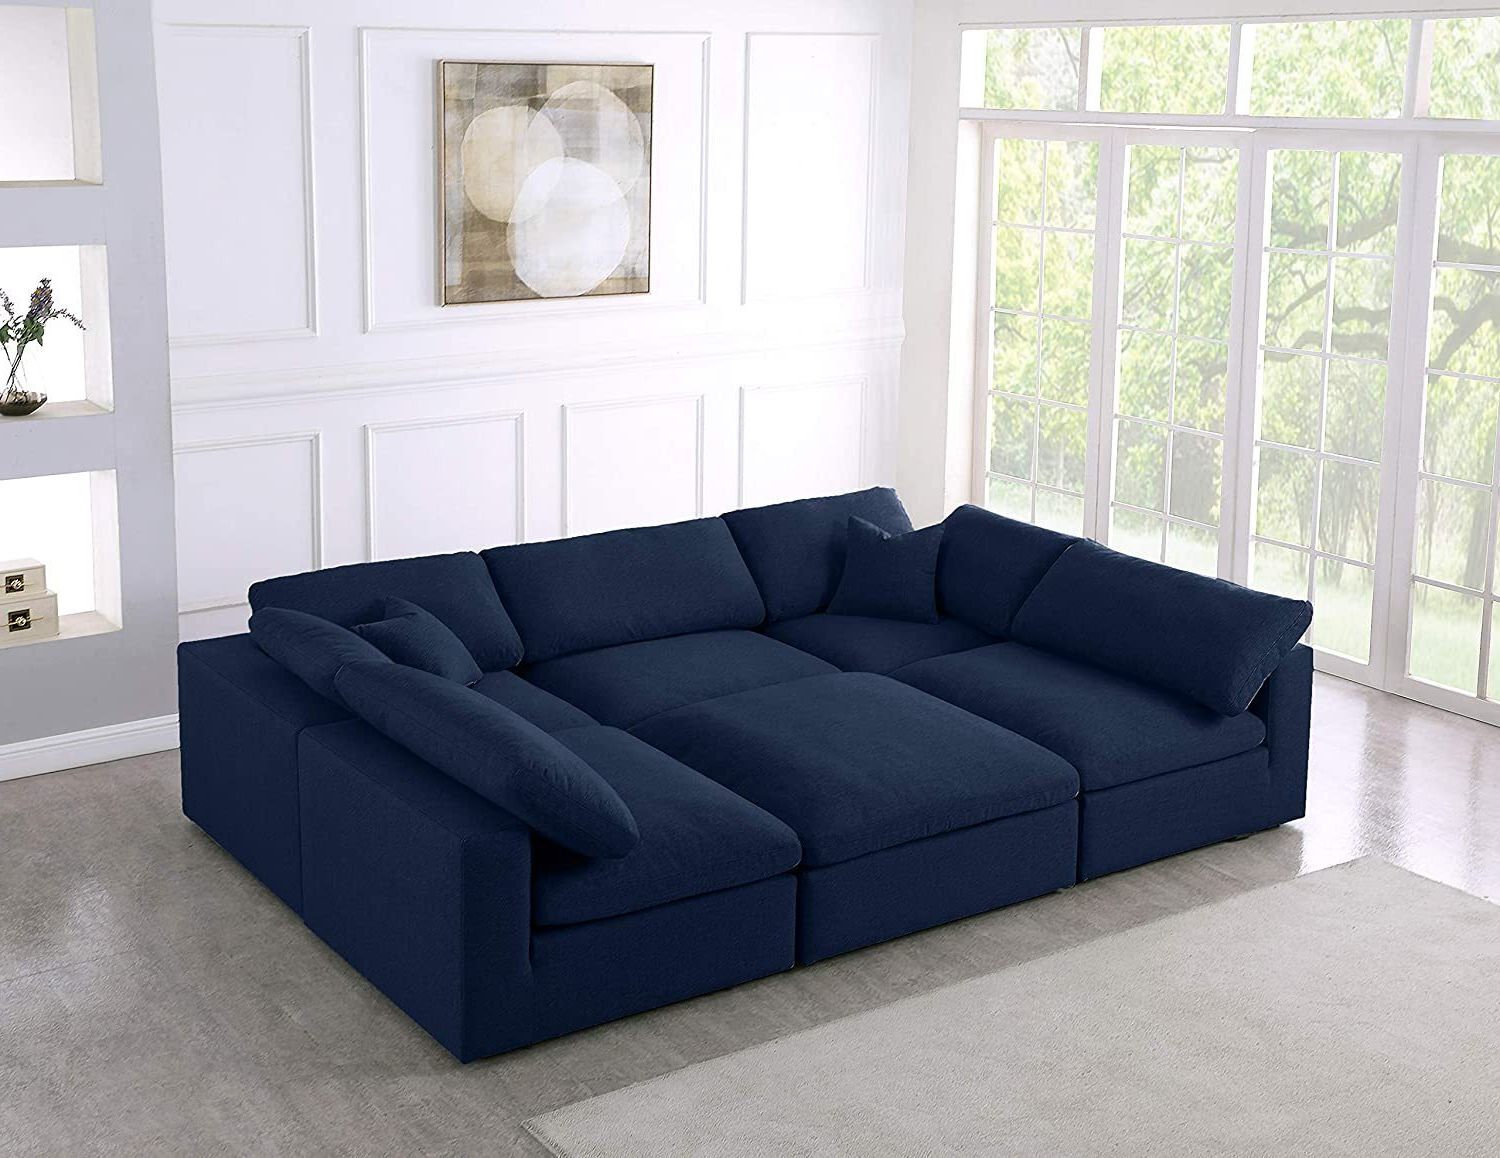 Modular Sleeper Sofas – Ideas On Foter Intended For Oversized Sleeper Sofa Couch Beds (View 2 of 20)